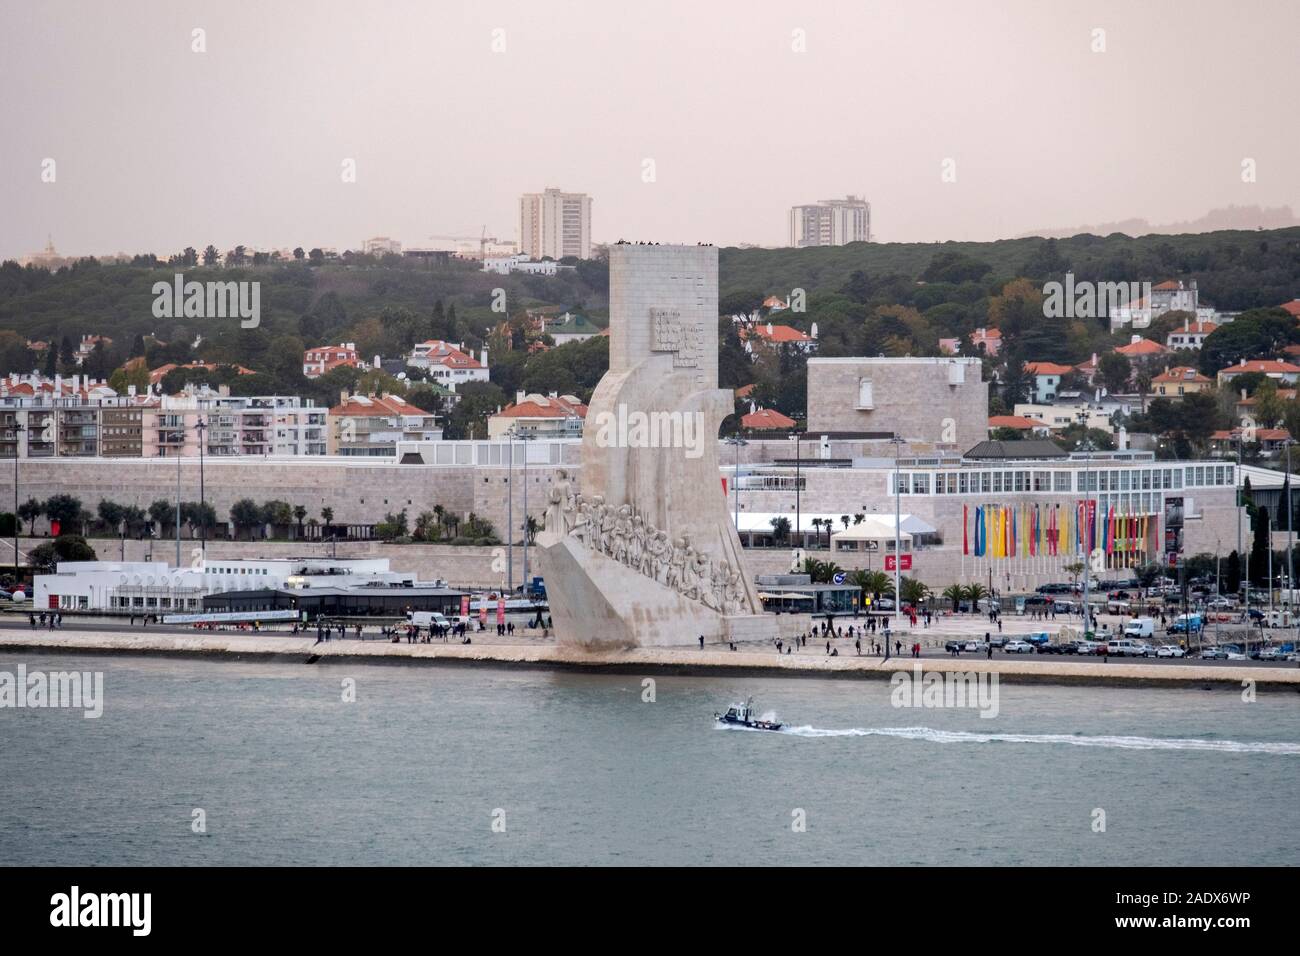 The Padrão dos Descobrimentos monument with the Centro Cultural de Belém in the background, as viewed from the Tagus river, Belem, Lisbon, Portugal Stock Photo